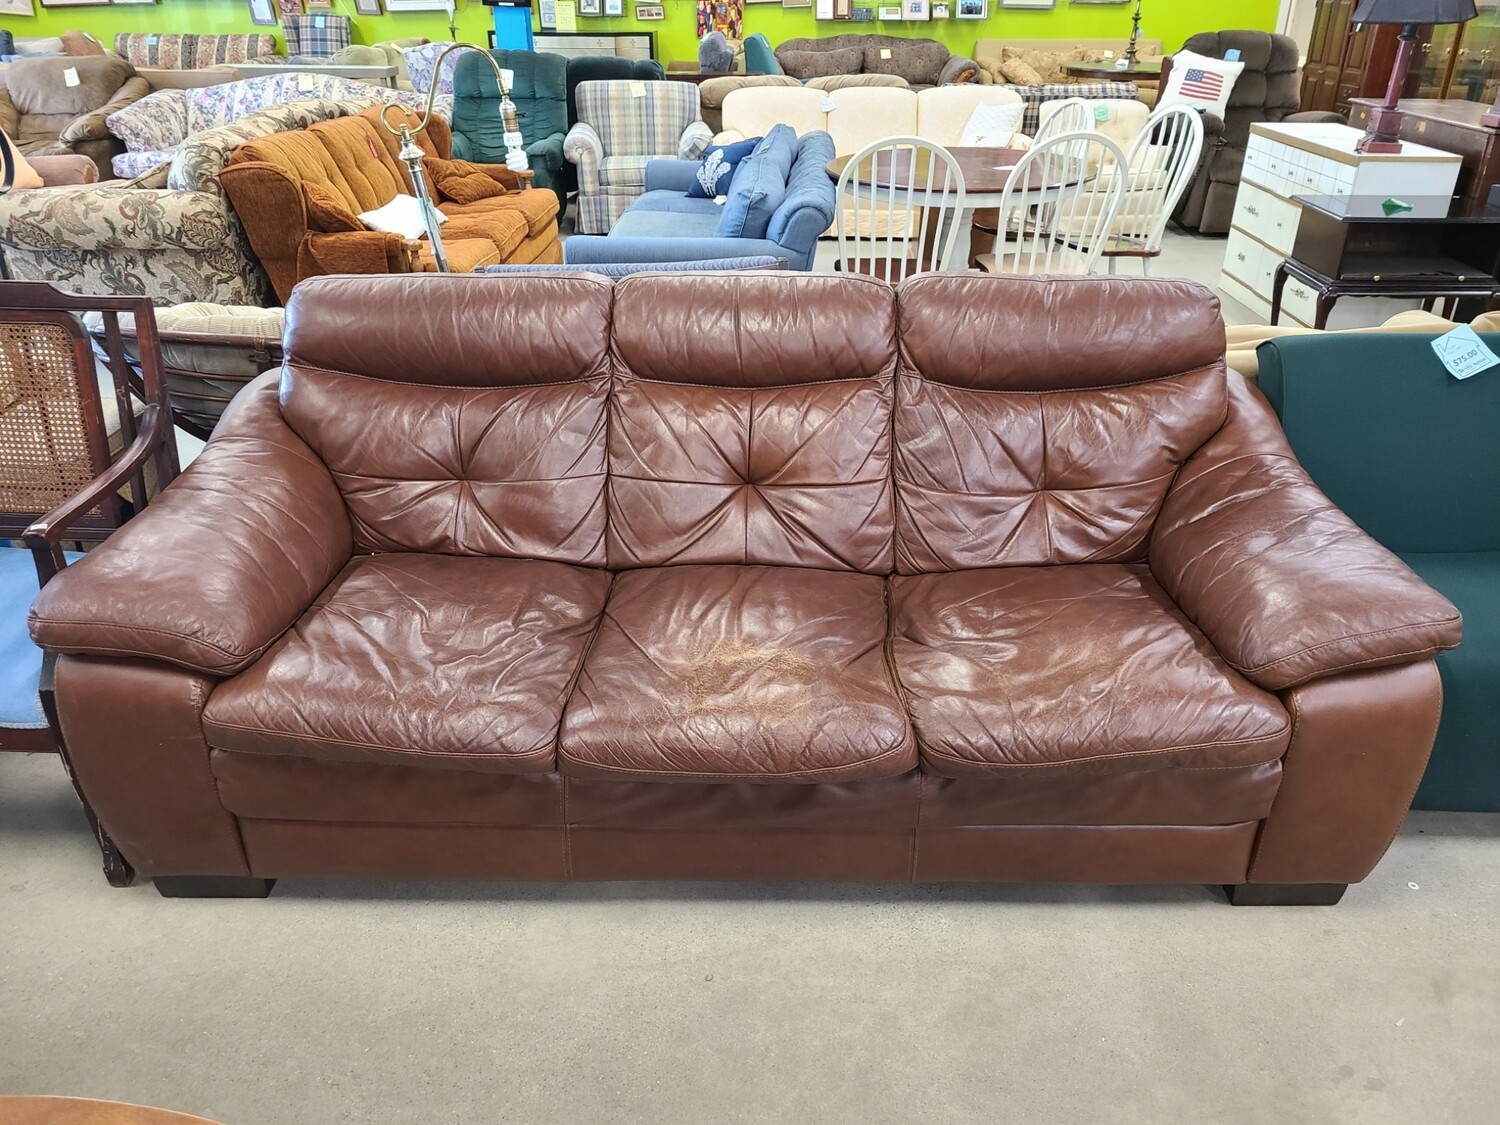 3 Seater Leather Couch